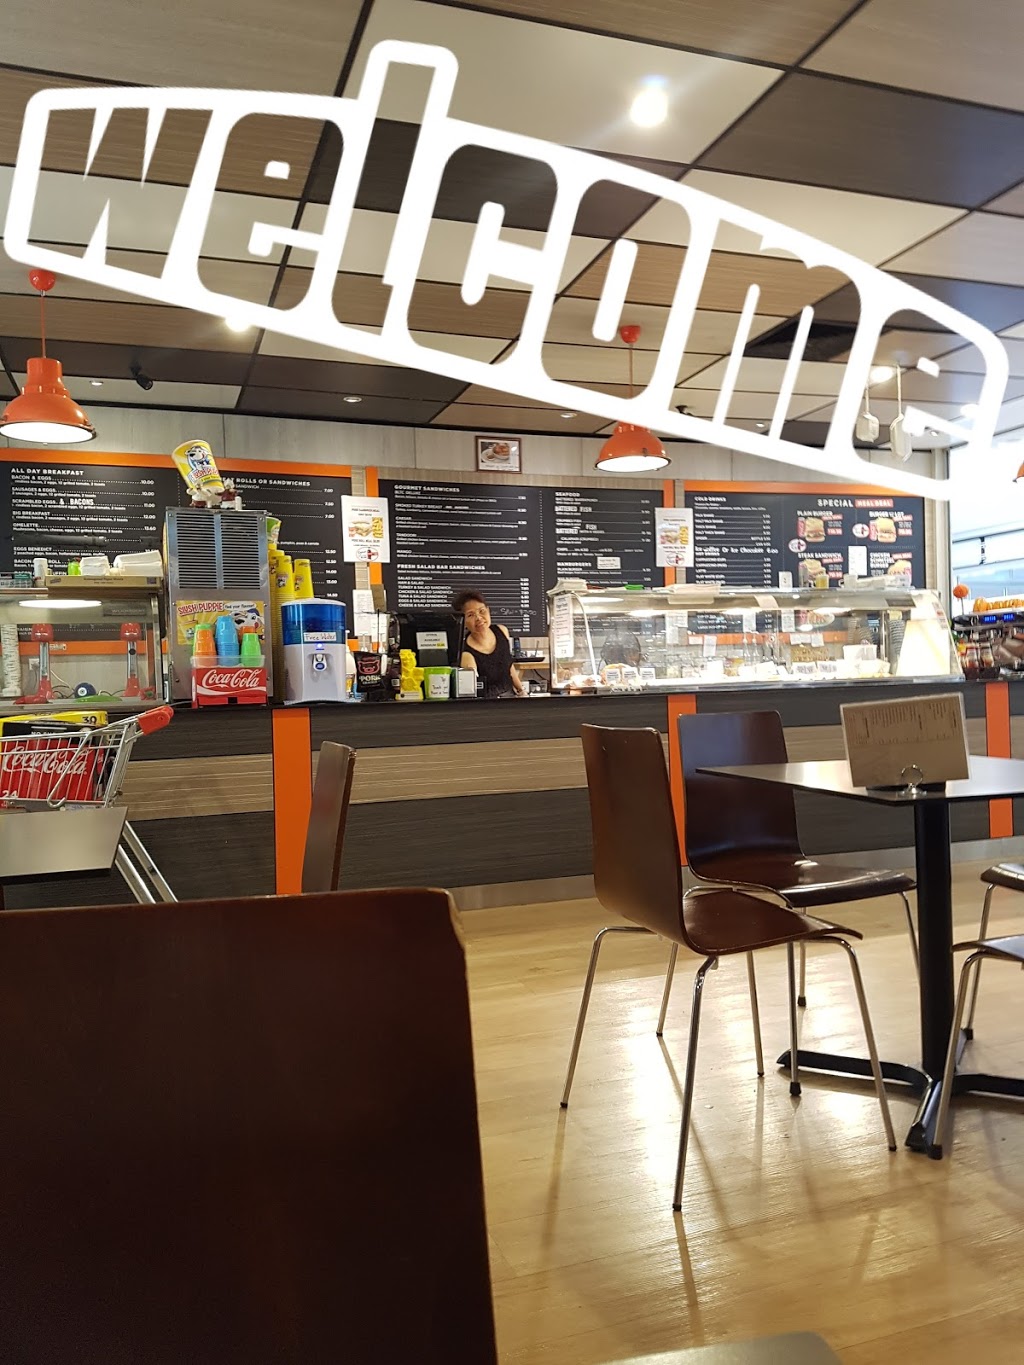 Helensvale Carvery & Coffee Lounge | cafe | 12 Sir John Overall Dr, Helensvale QLD 4212, Australia | 0755734499 OR +61 7 5573 4499